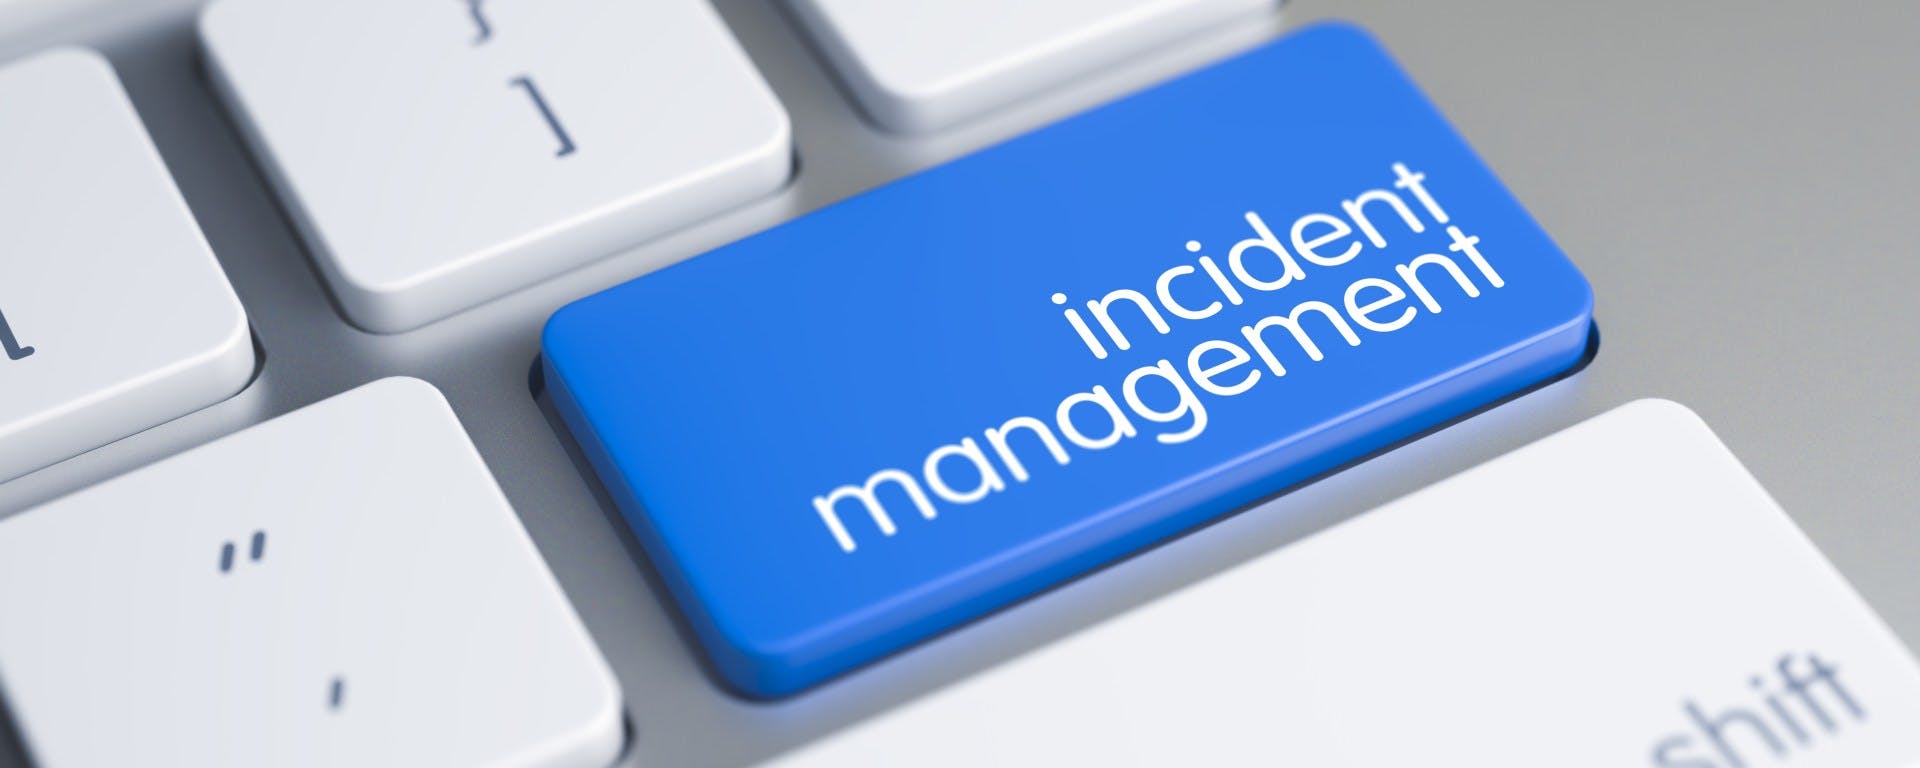 SECURITY INCIDENT MANAGEMENT POLICY